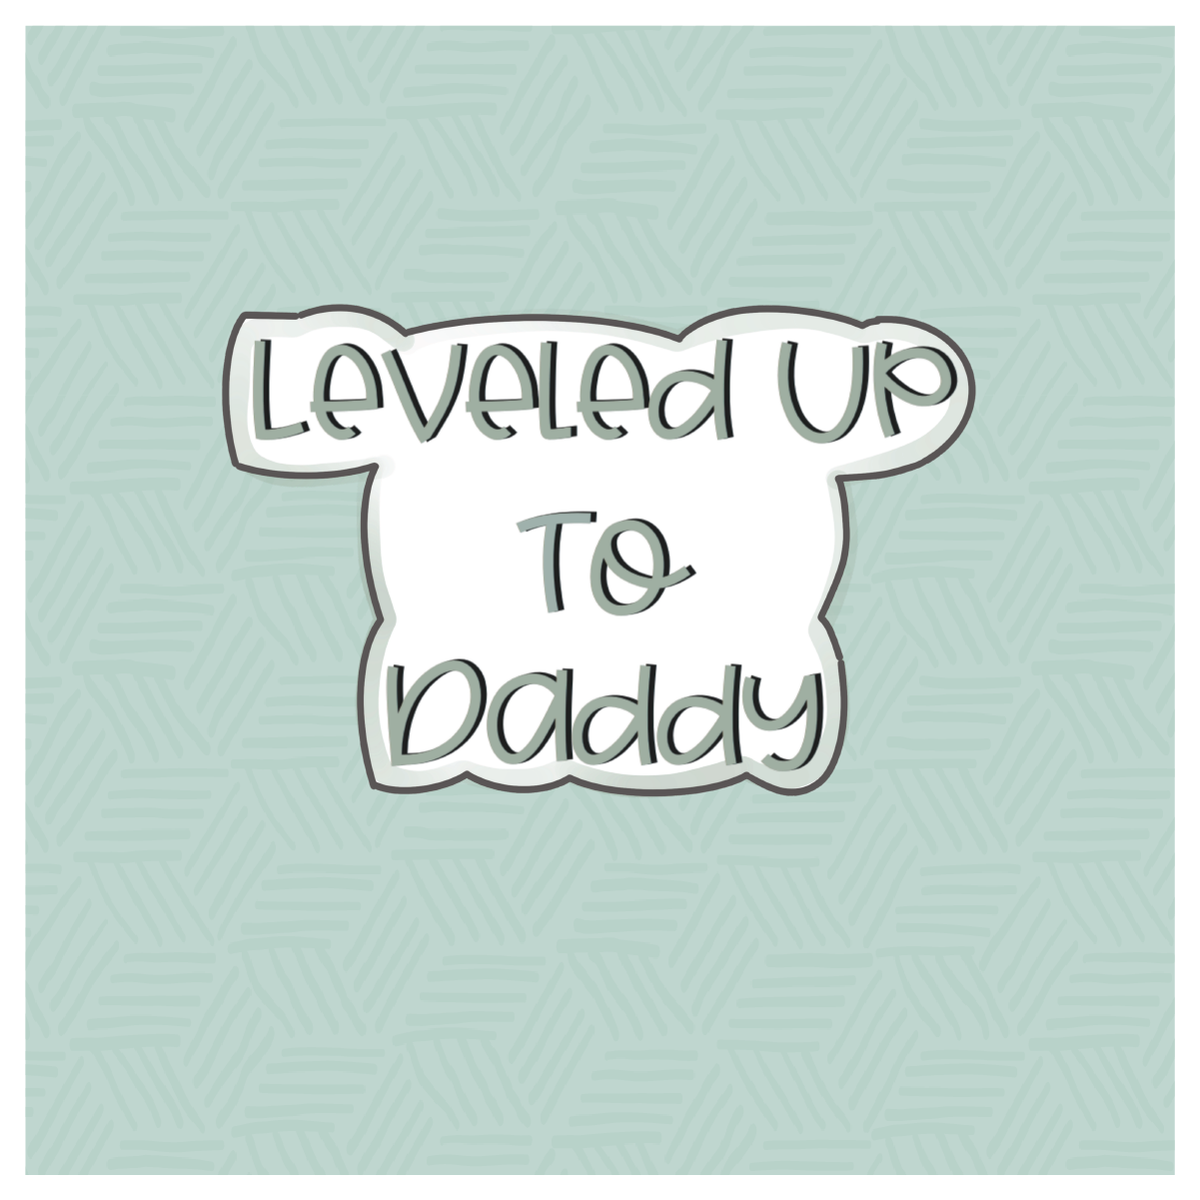 Leveled Up to Daddy Hand Lettered Cookie Cutter